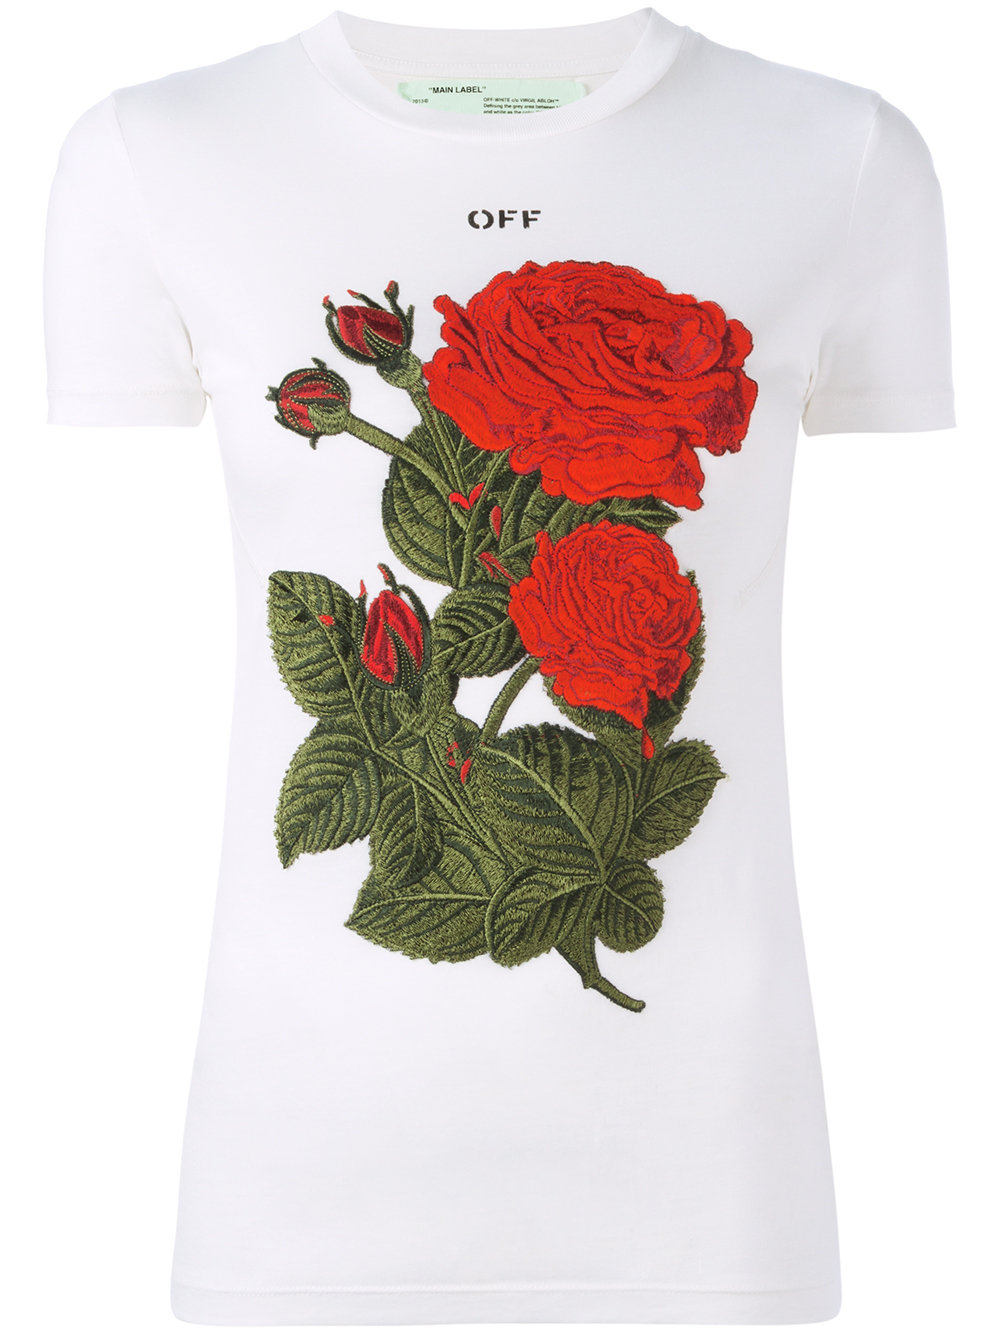 Off-White roses patch T-shirt reliable supplier BIANCO Women Clothing T-shirts & Jerseys